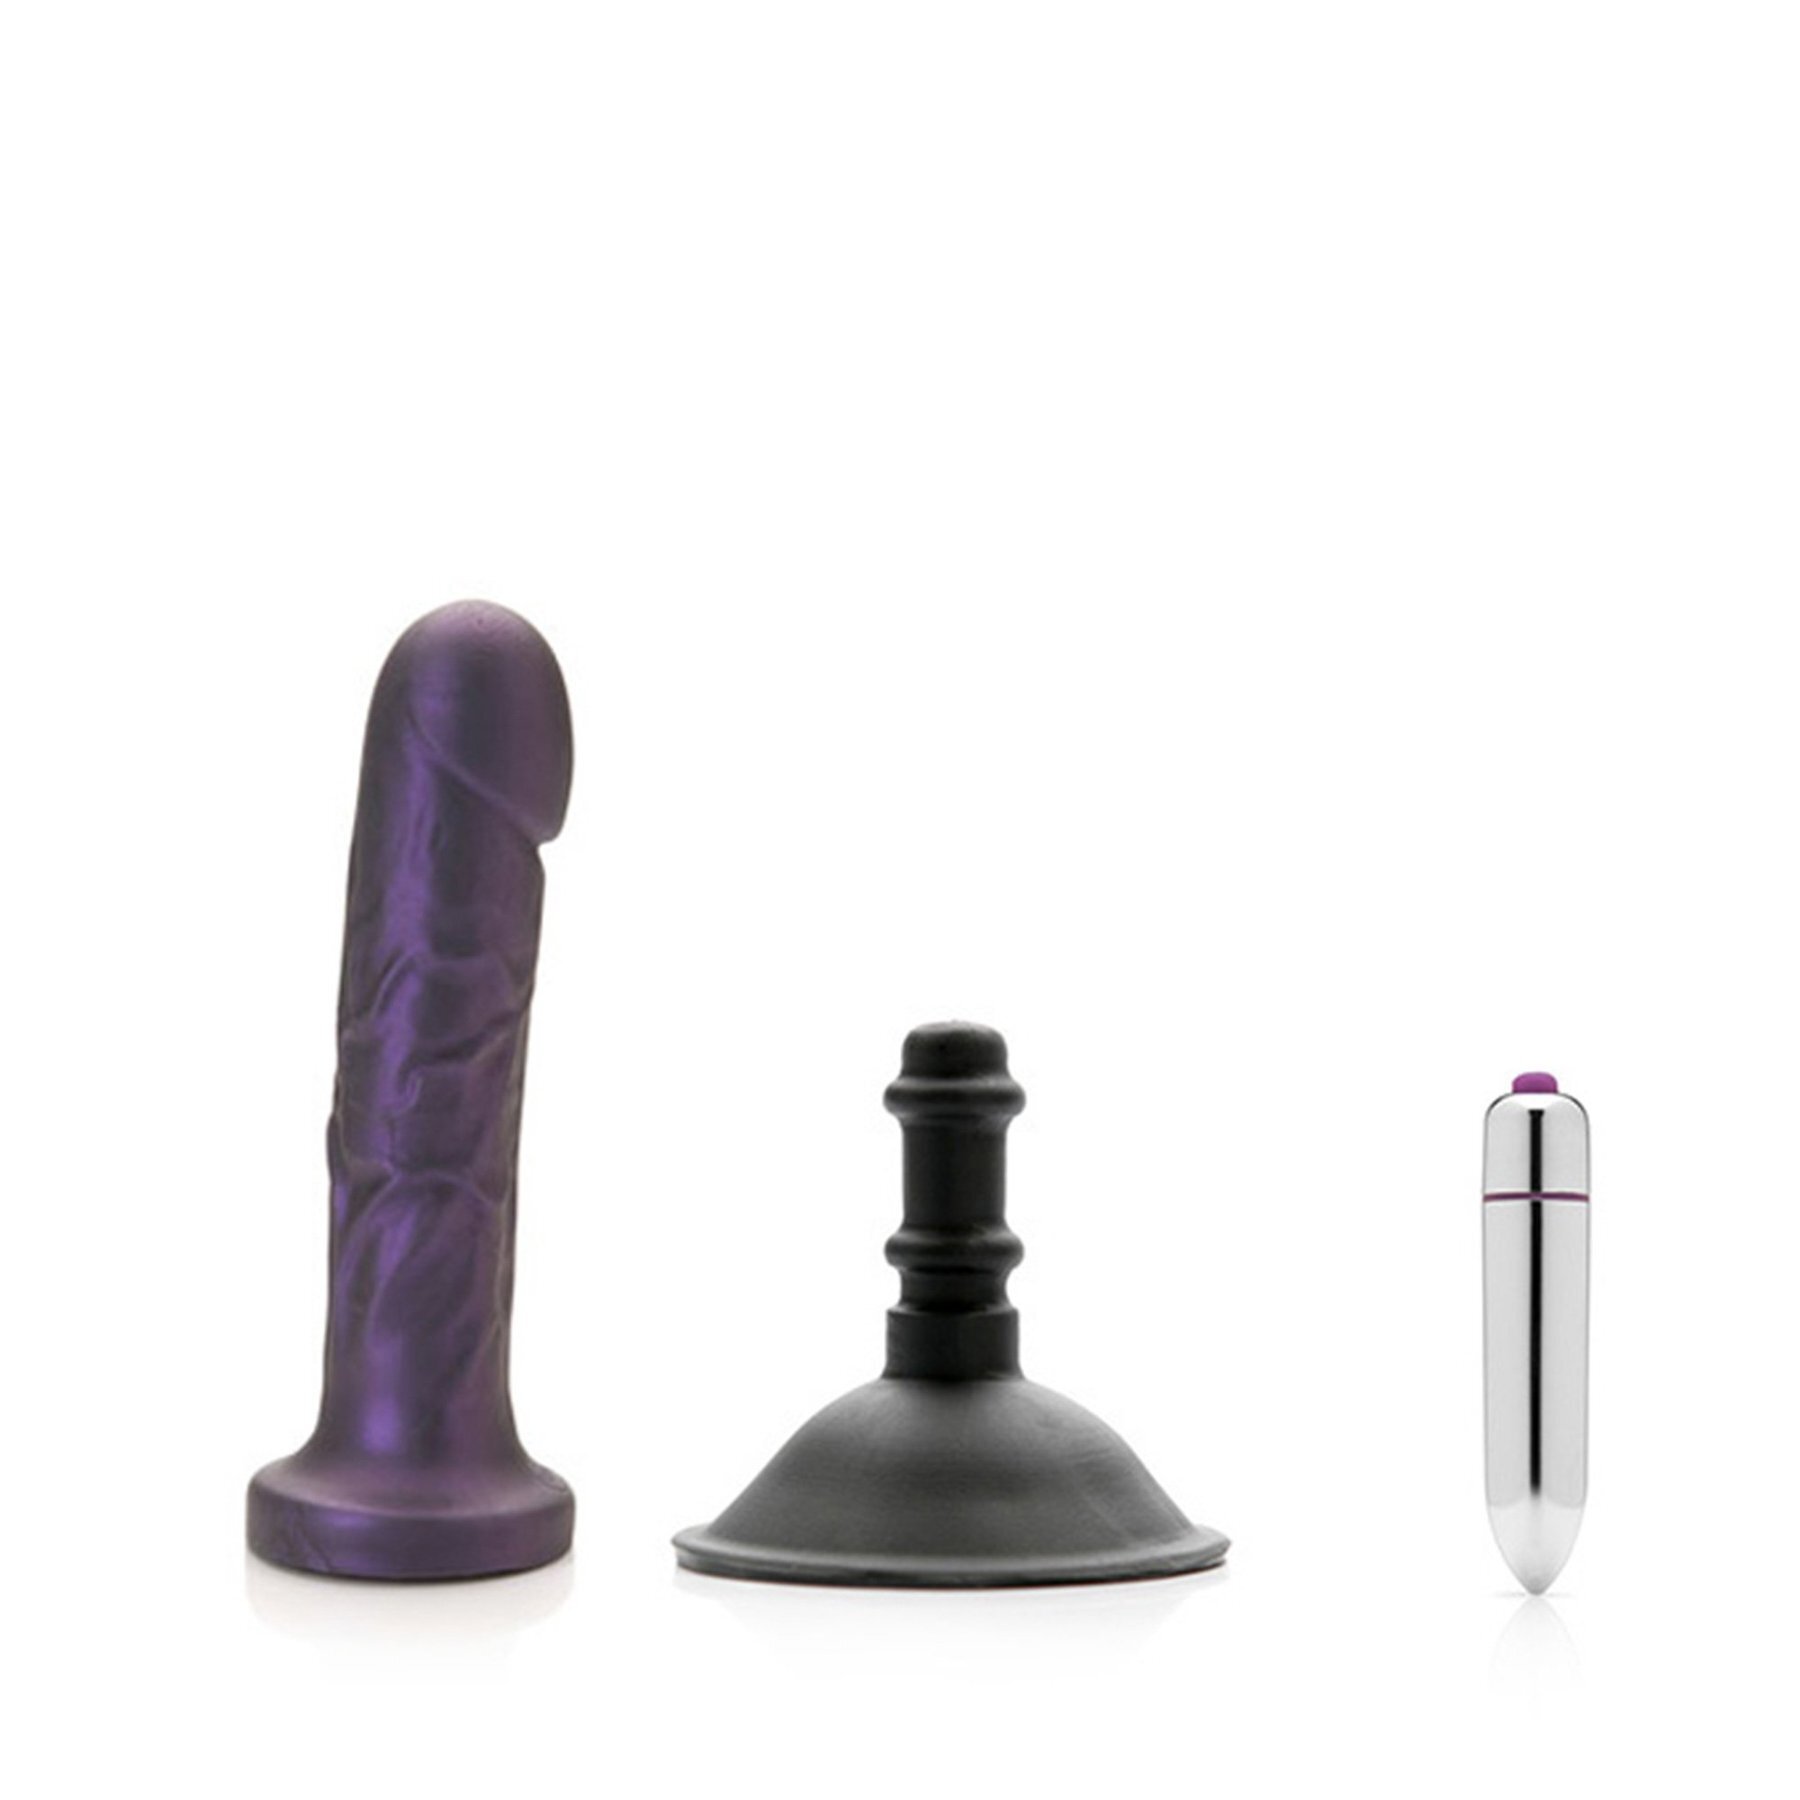 Goliath by Tantus (online store)